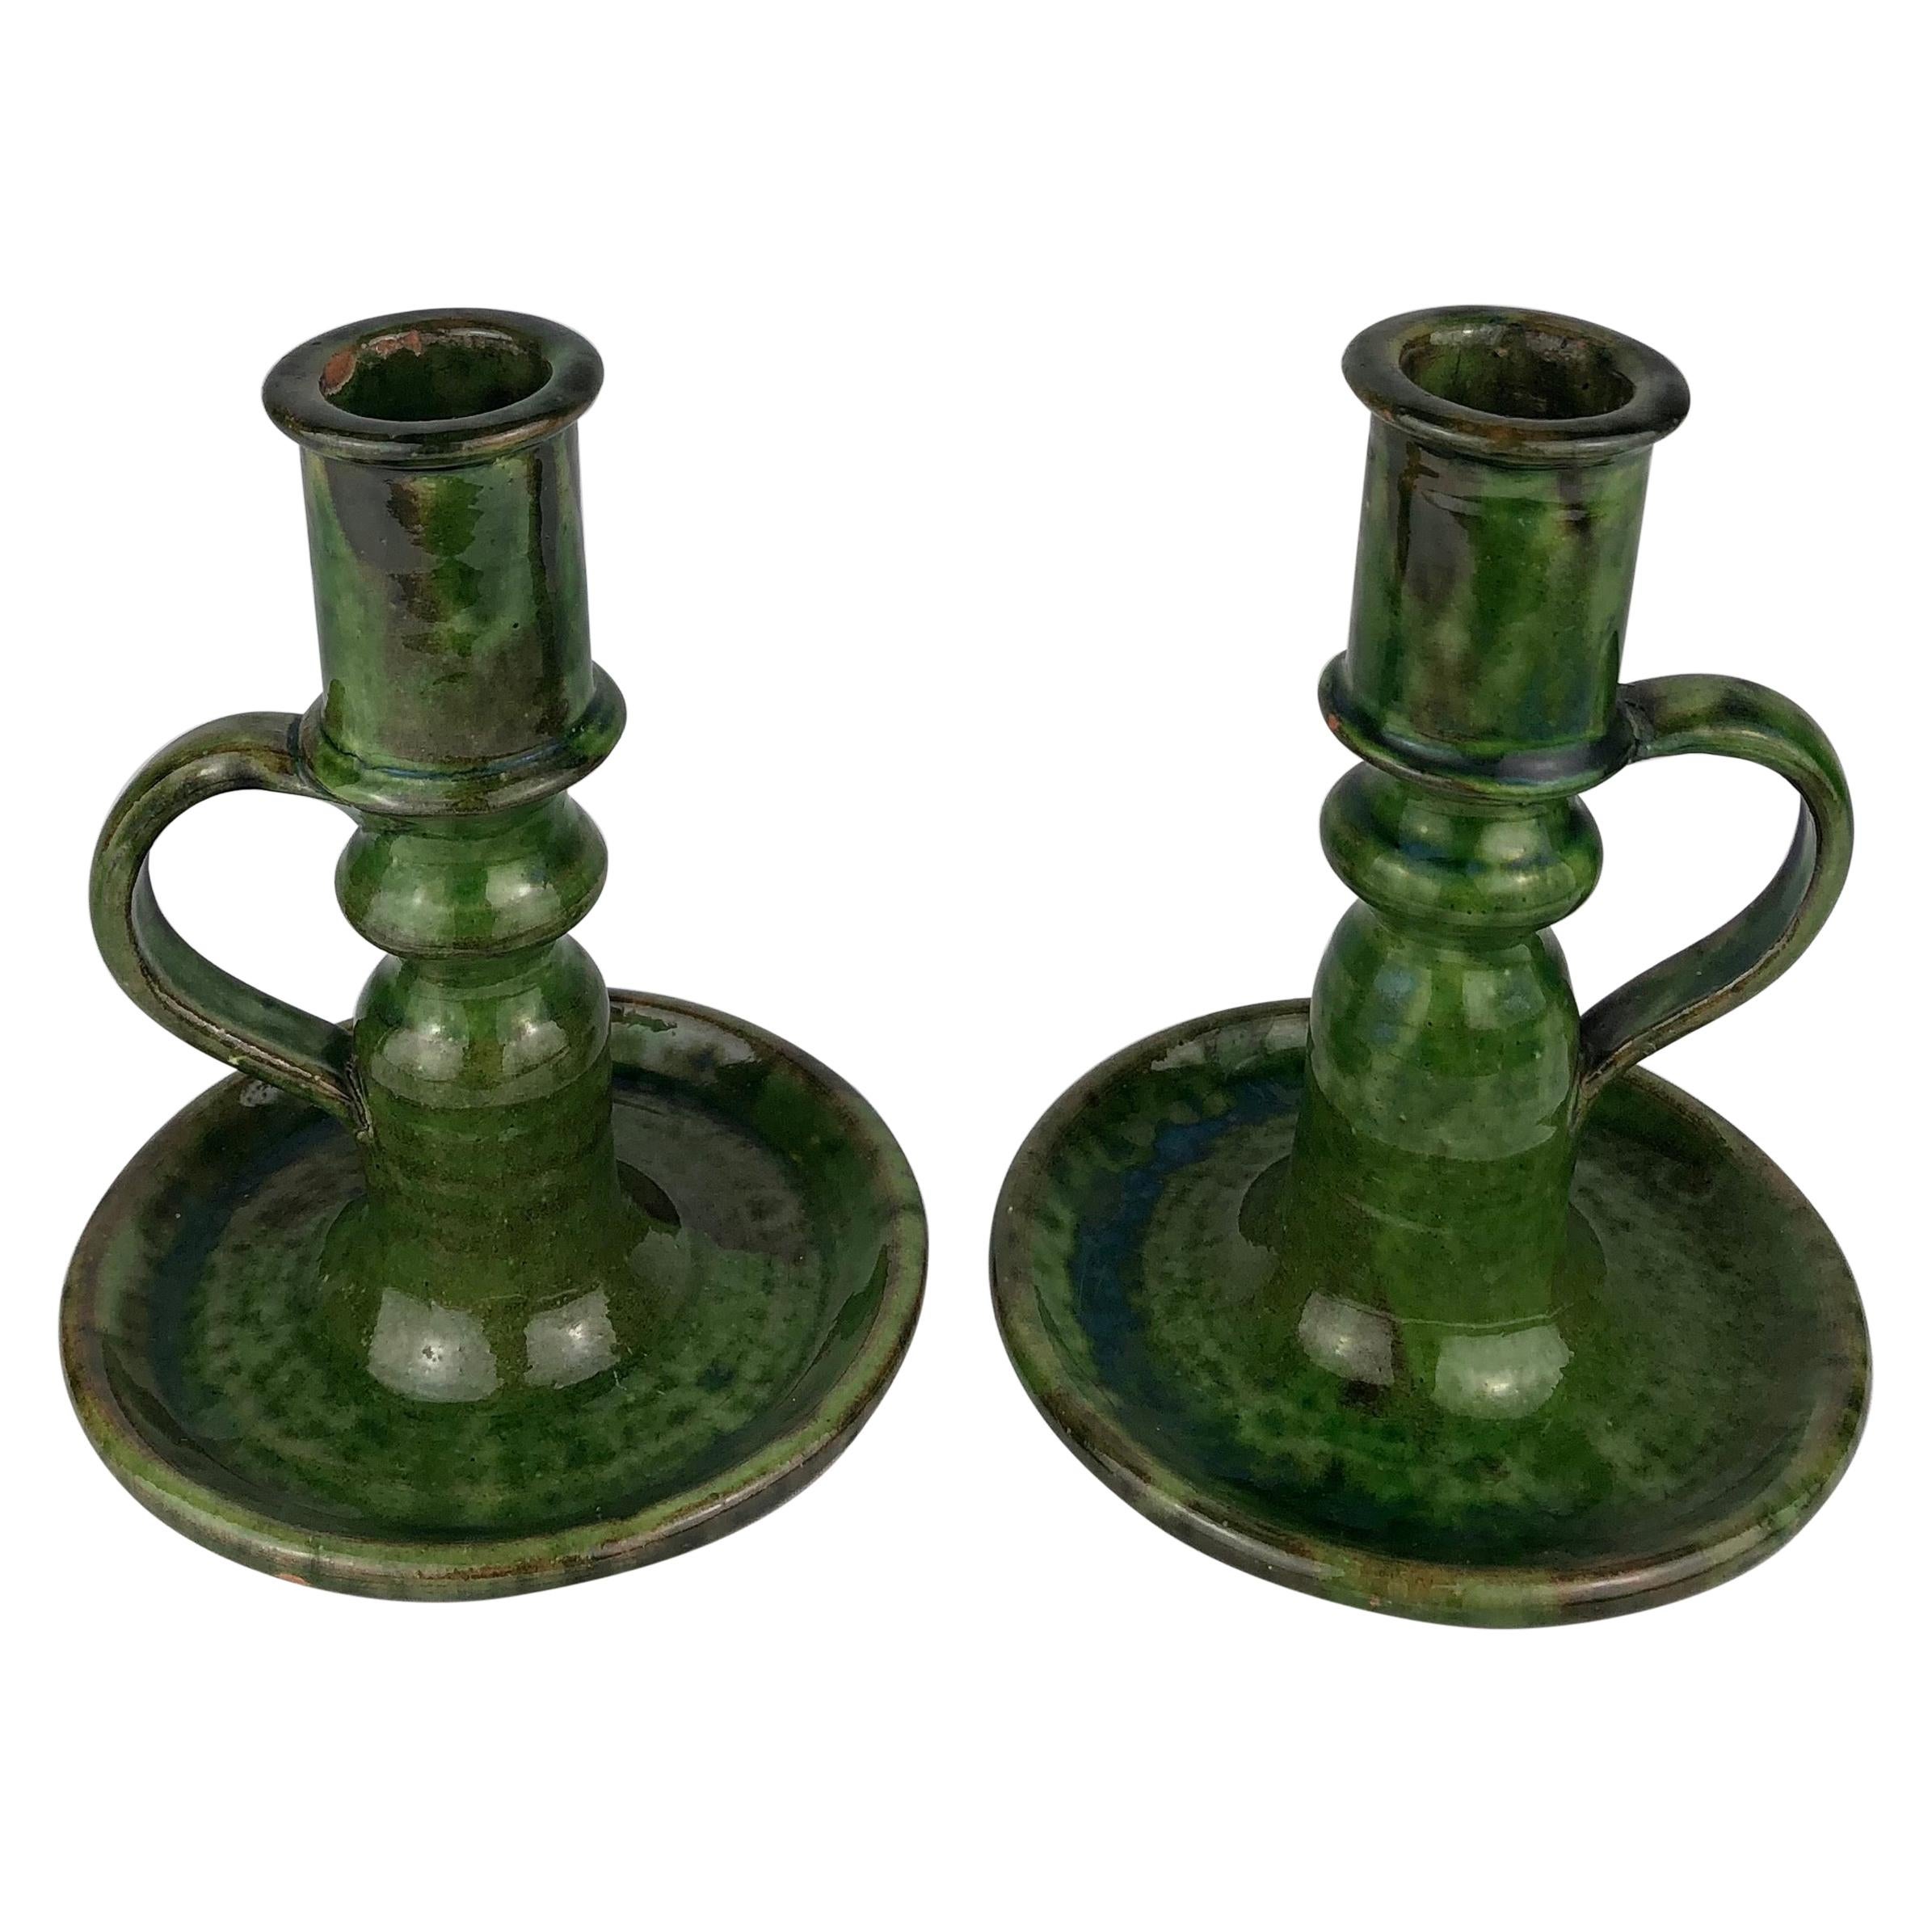 Pair of French Midcentury Ceramic Candleholders, Green